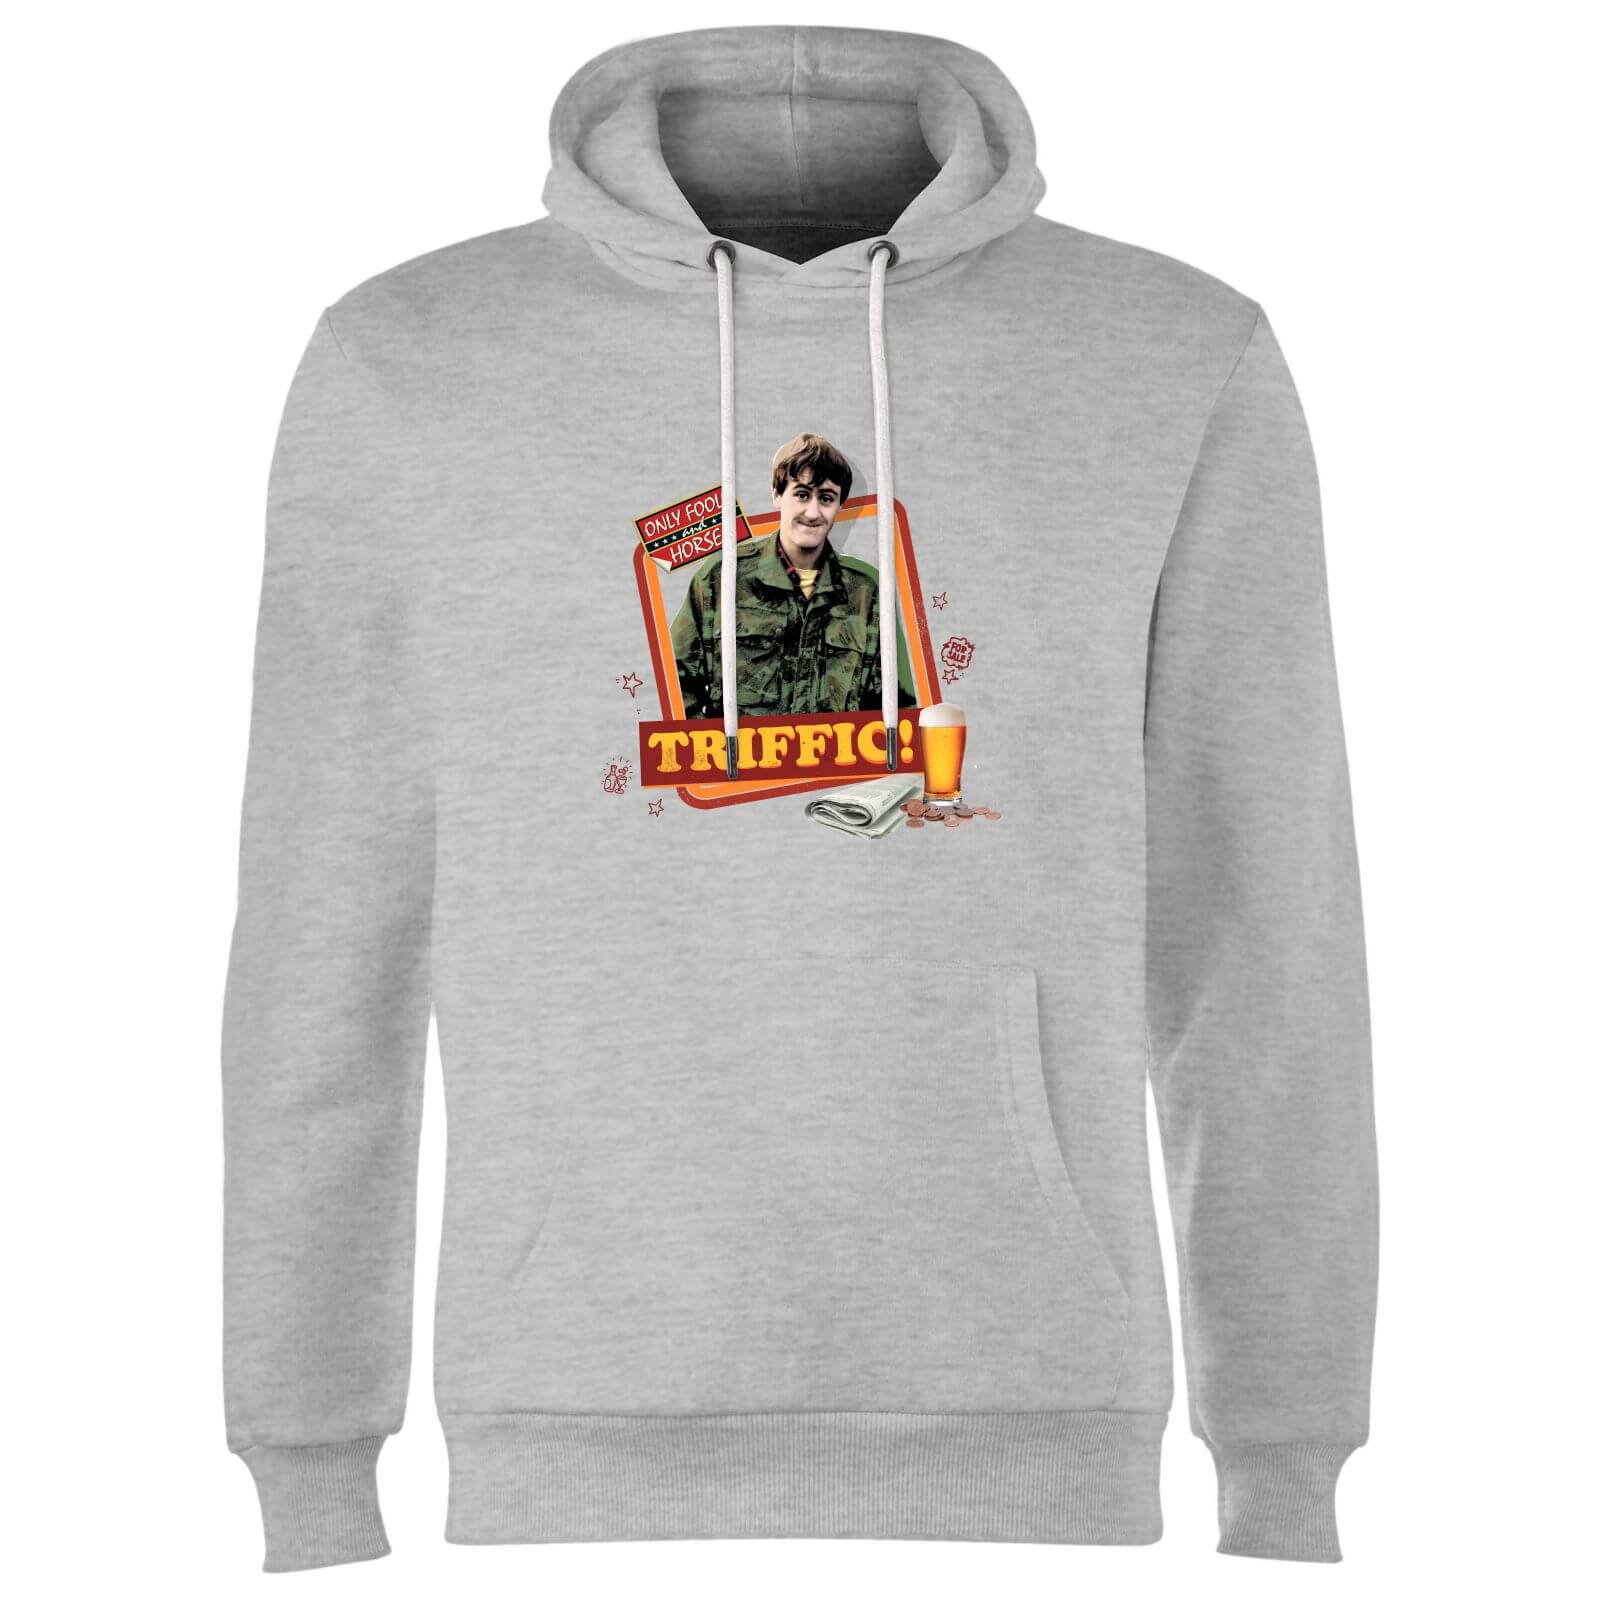 Only Fools And Horses Triffic Hoodie - Grey - S